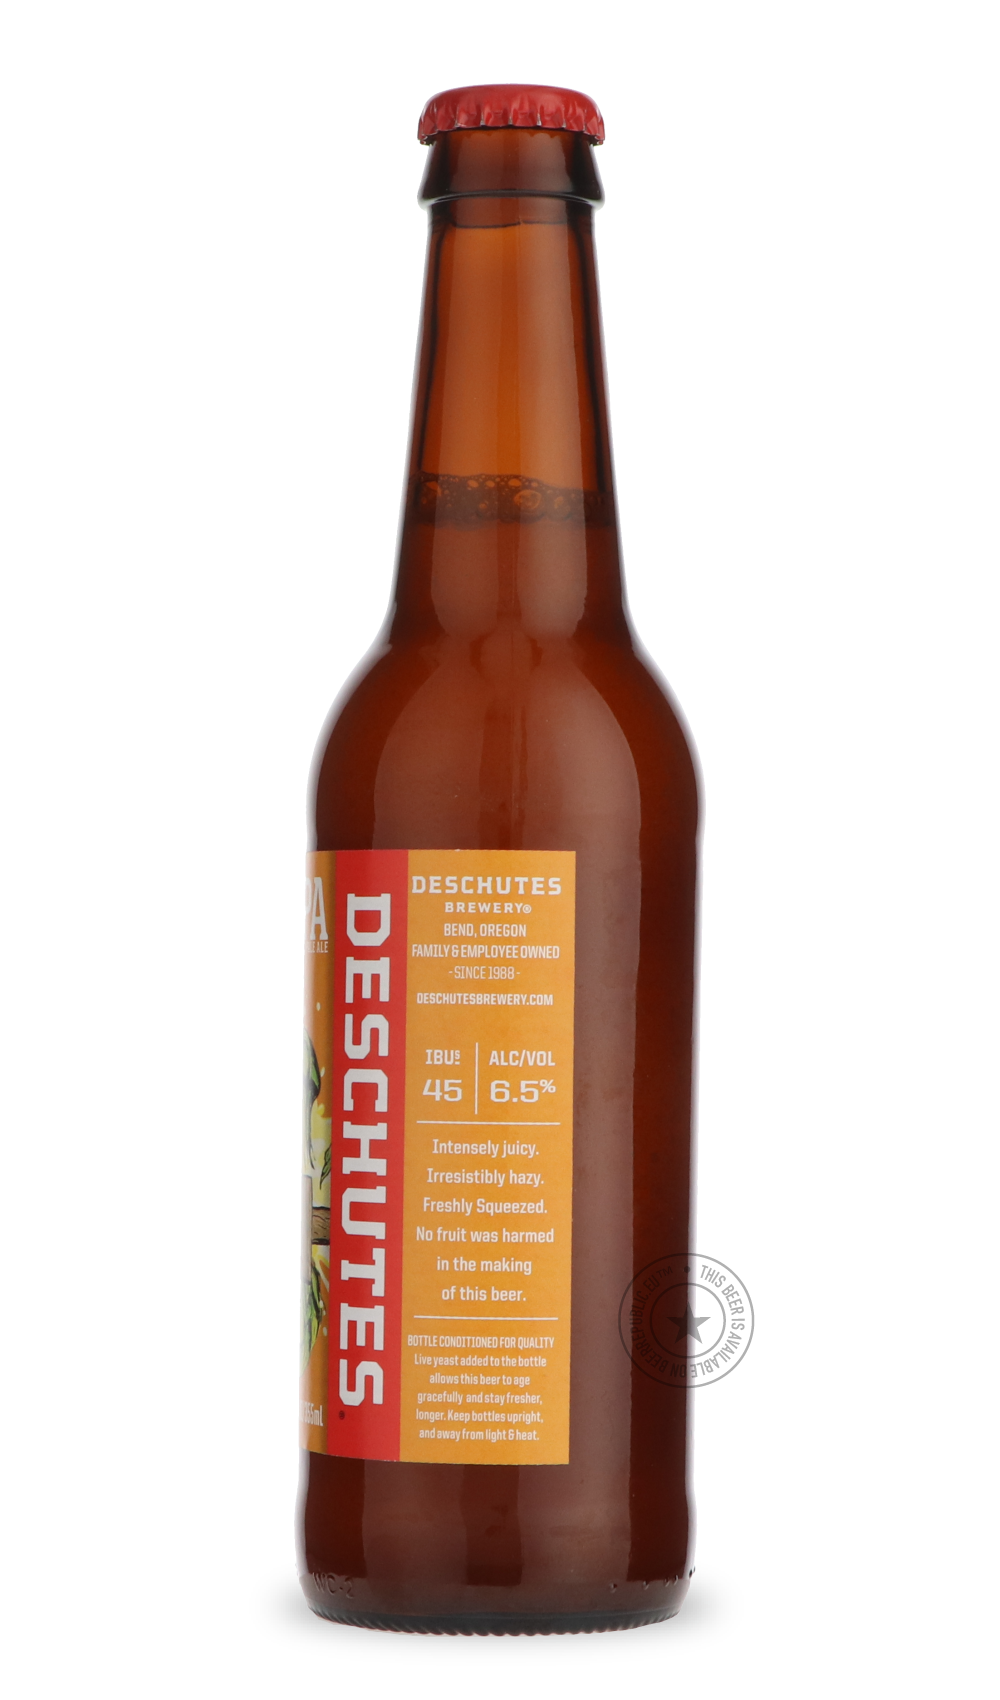 -Deschutes- Fresh Haze-IPA- Only @ Beer Republic - The best online beer store for American & Canadian craft beer - Buy beer online from the USA and Canada - Bier online kopen - Amerikaans bier kopen - Craft beer store - Craft beer kopen - Amerikanisch bier kaufen - Bier online kaufen - Acheter biere online - IPA - Stout - Porter - New England IPA - Hazy IPA - Imperial Stout - Barrel Aged - Barrel Aged Imperial Stout - Brown - Dark beer - Blond - Blonde - Pilsner - Lager - Wheat - Weizen - Amber - Barley Win